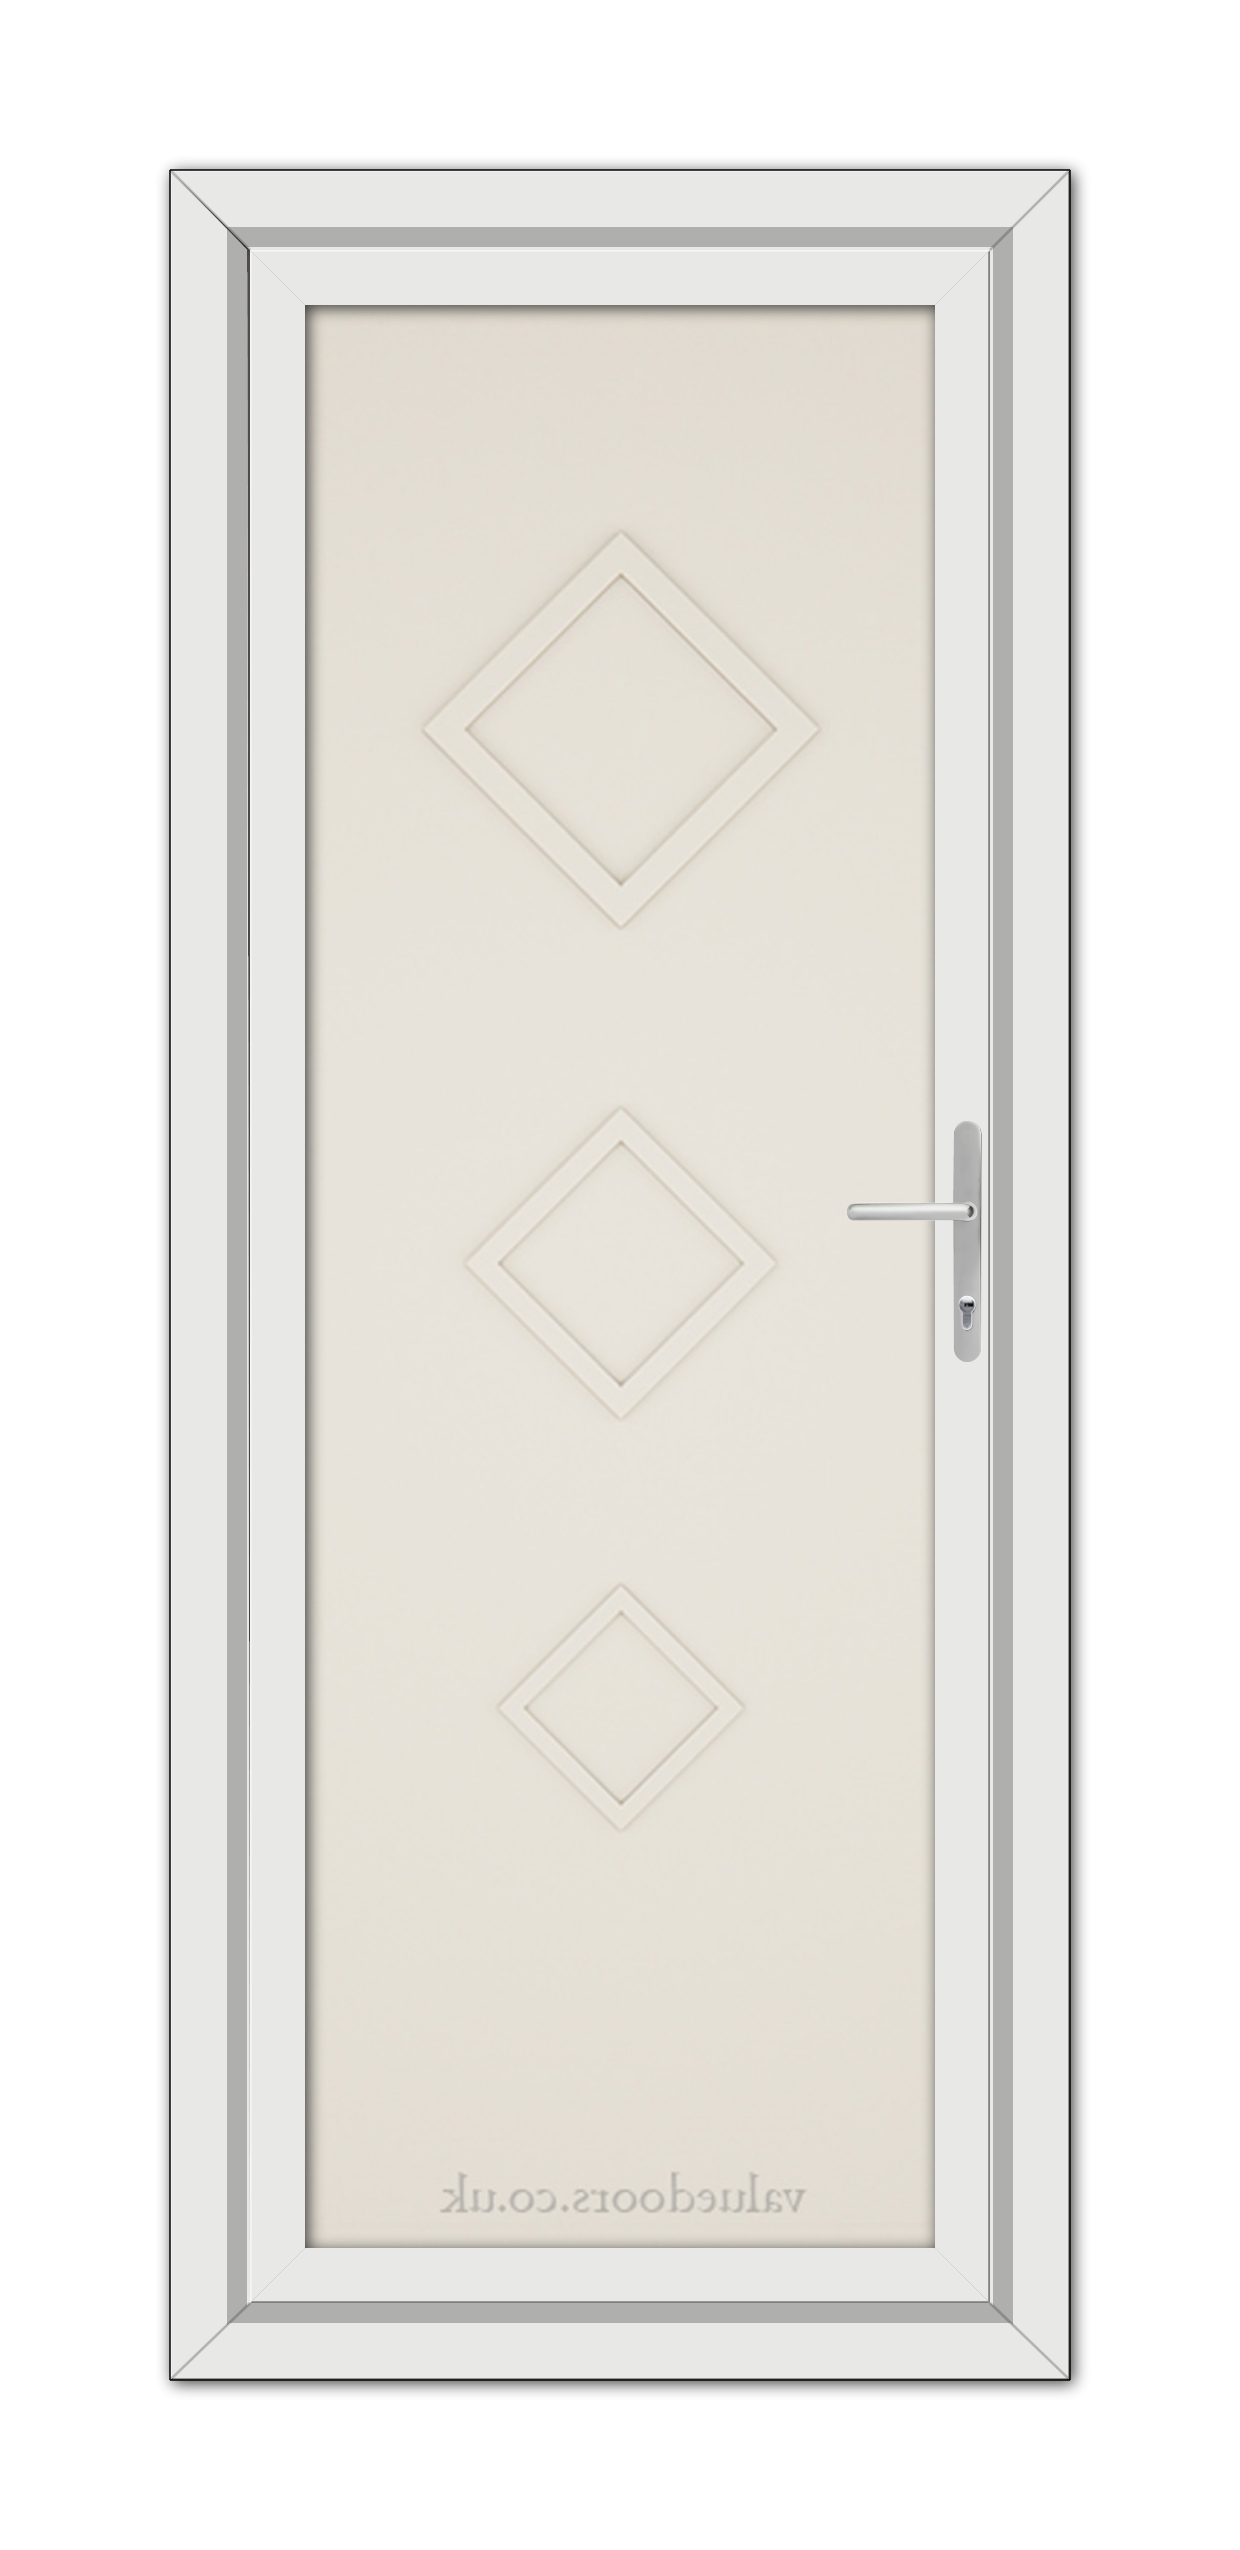 A vertical image of a closed, Cream Modern 5123 Solid uPVC Door with a beige frame, featuring two diamond-shaped panels and a metallic handle.